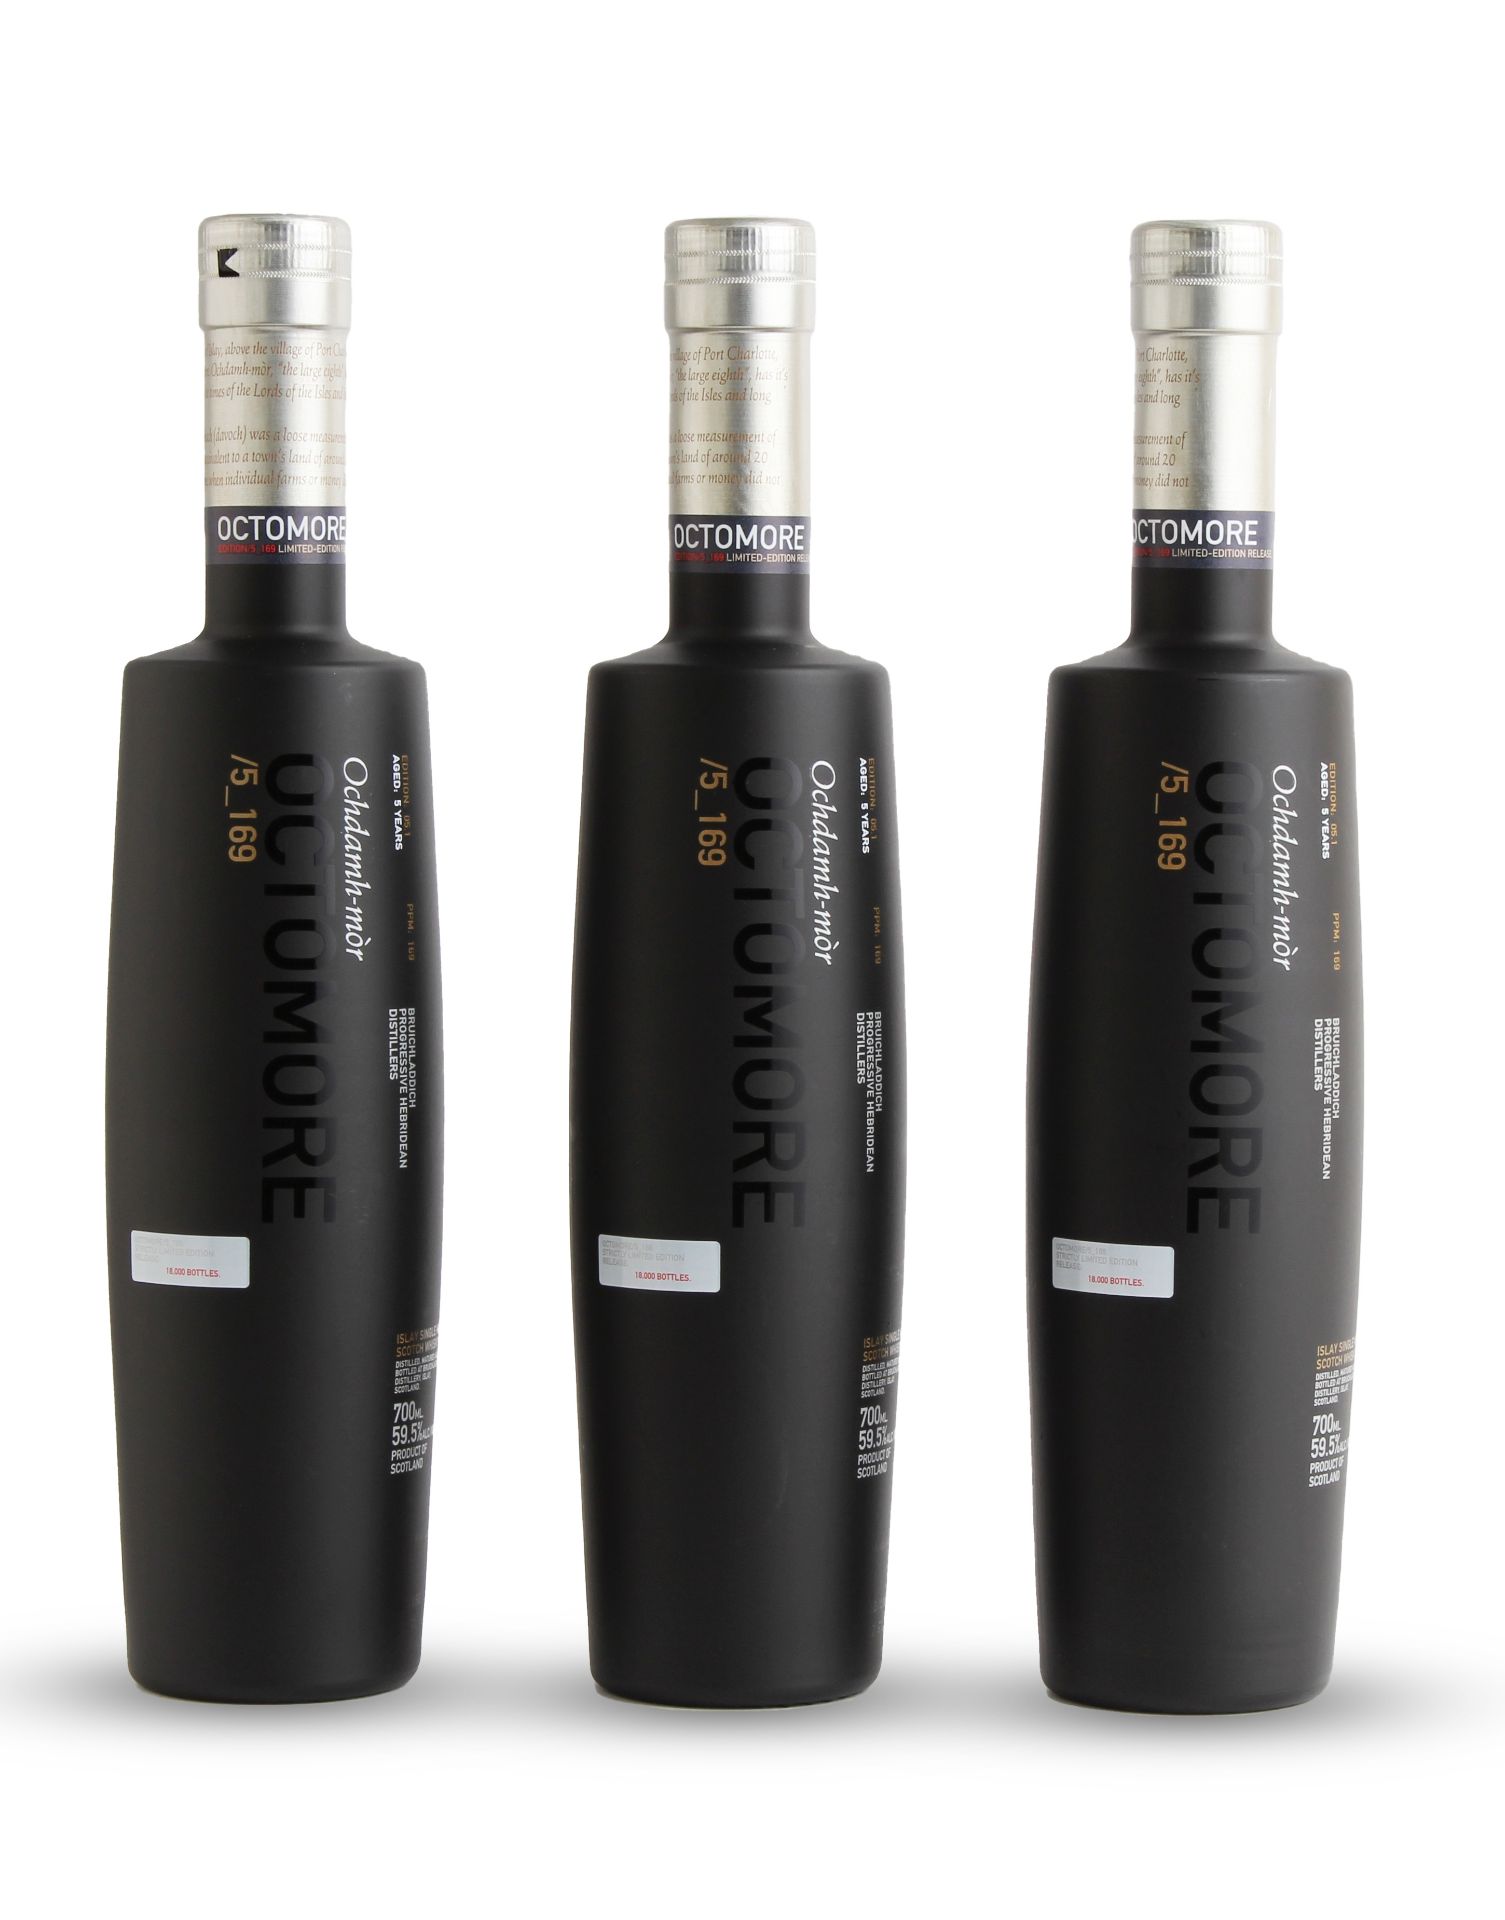 Octomore 5.1-5 year old (3)